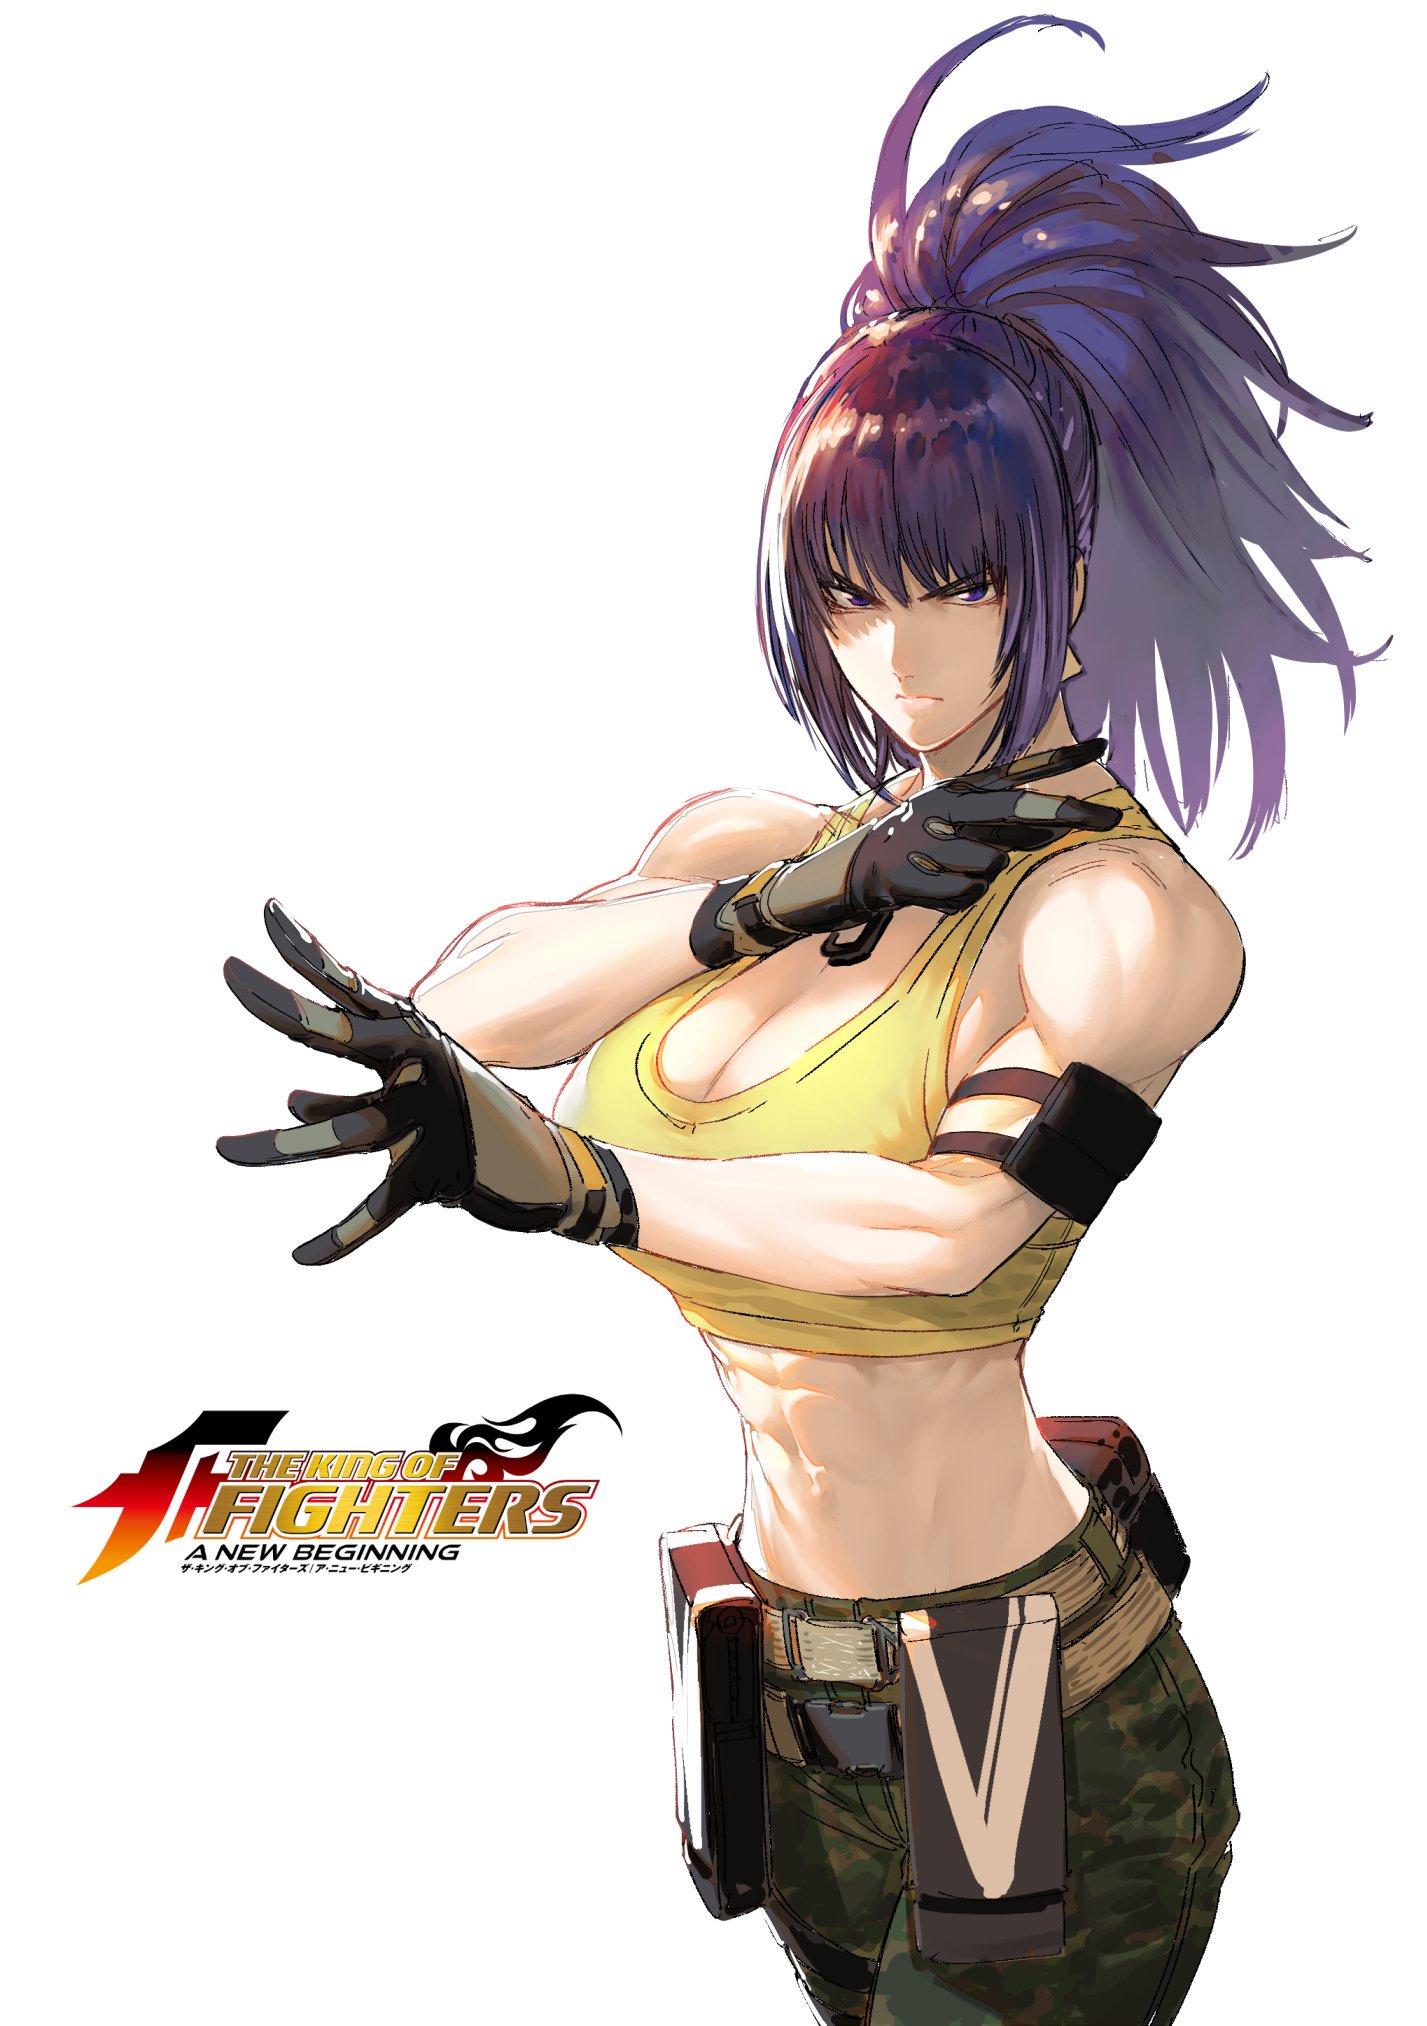 The King of Fighters: A New Beginning Coming to North America in